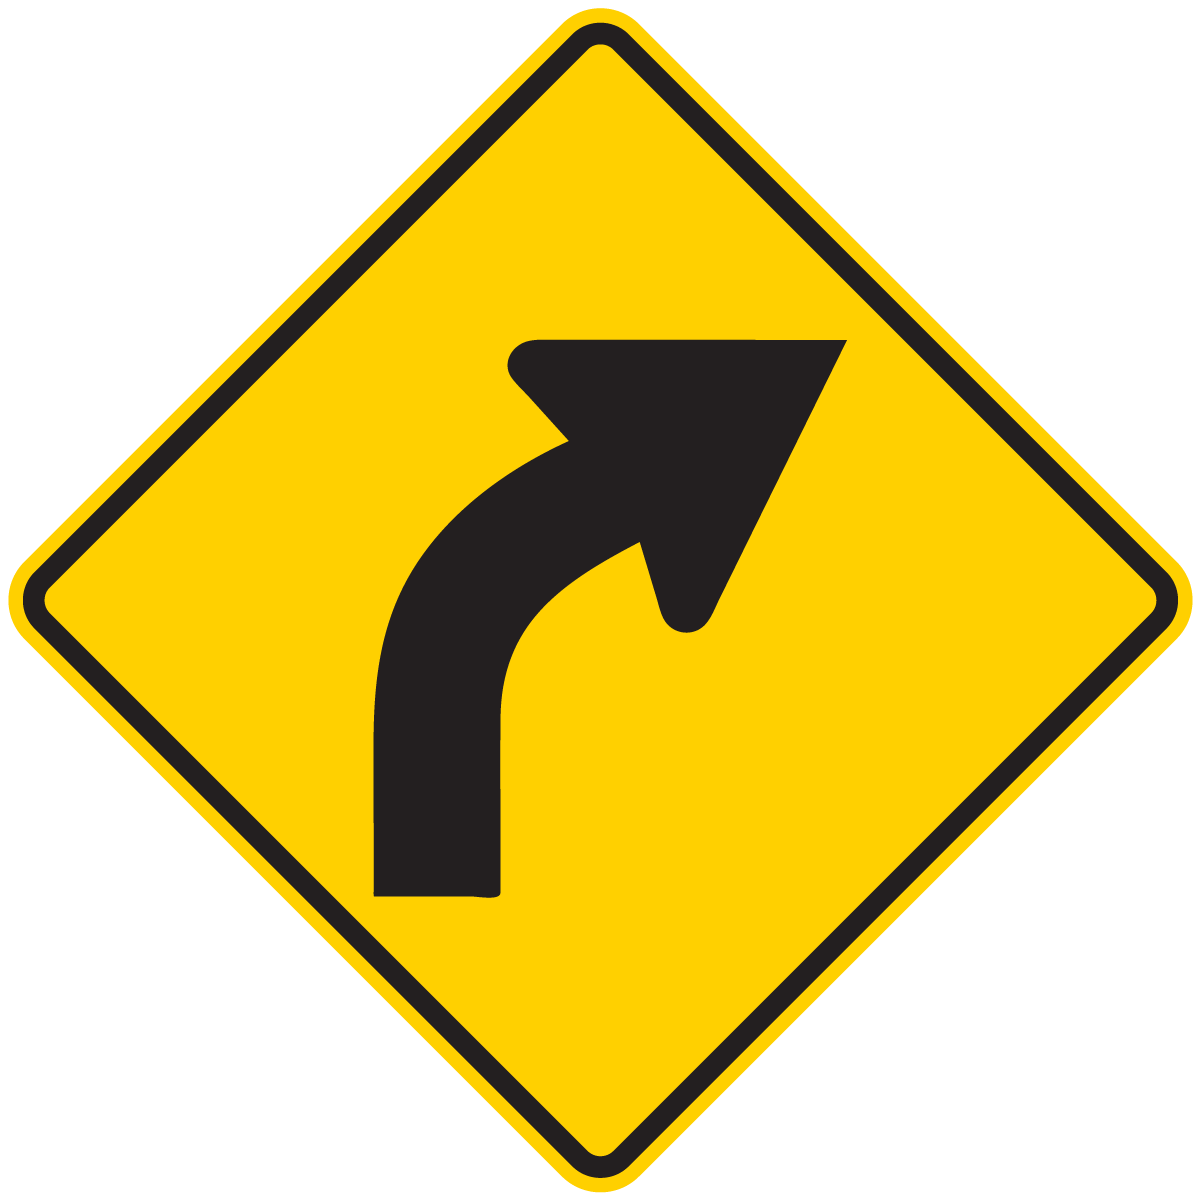 W1-2 Curve (Left or Right)